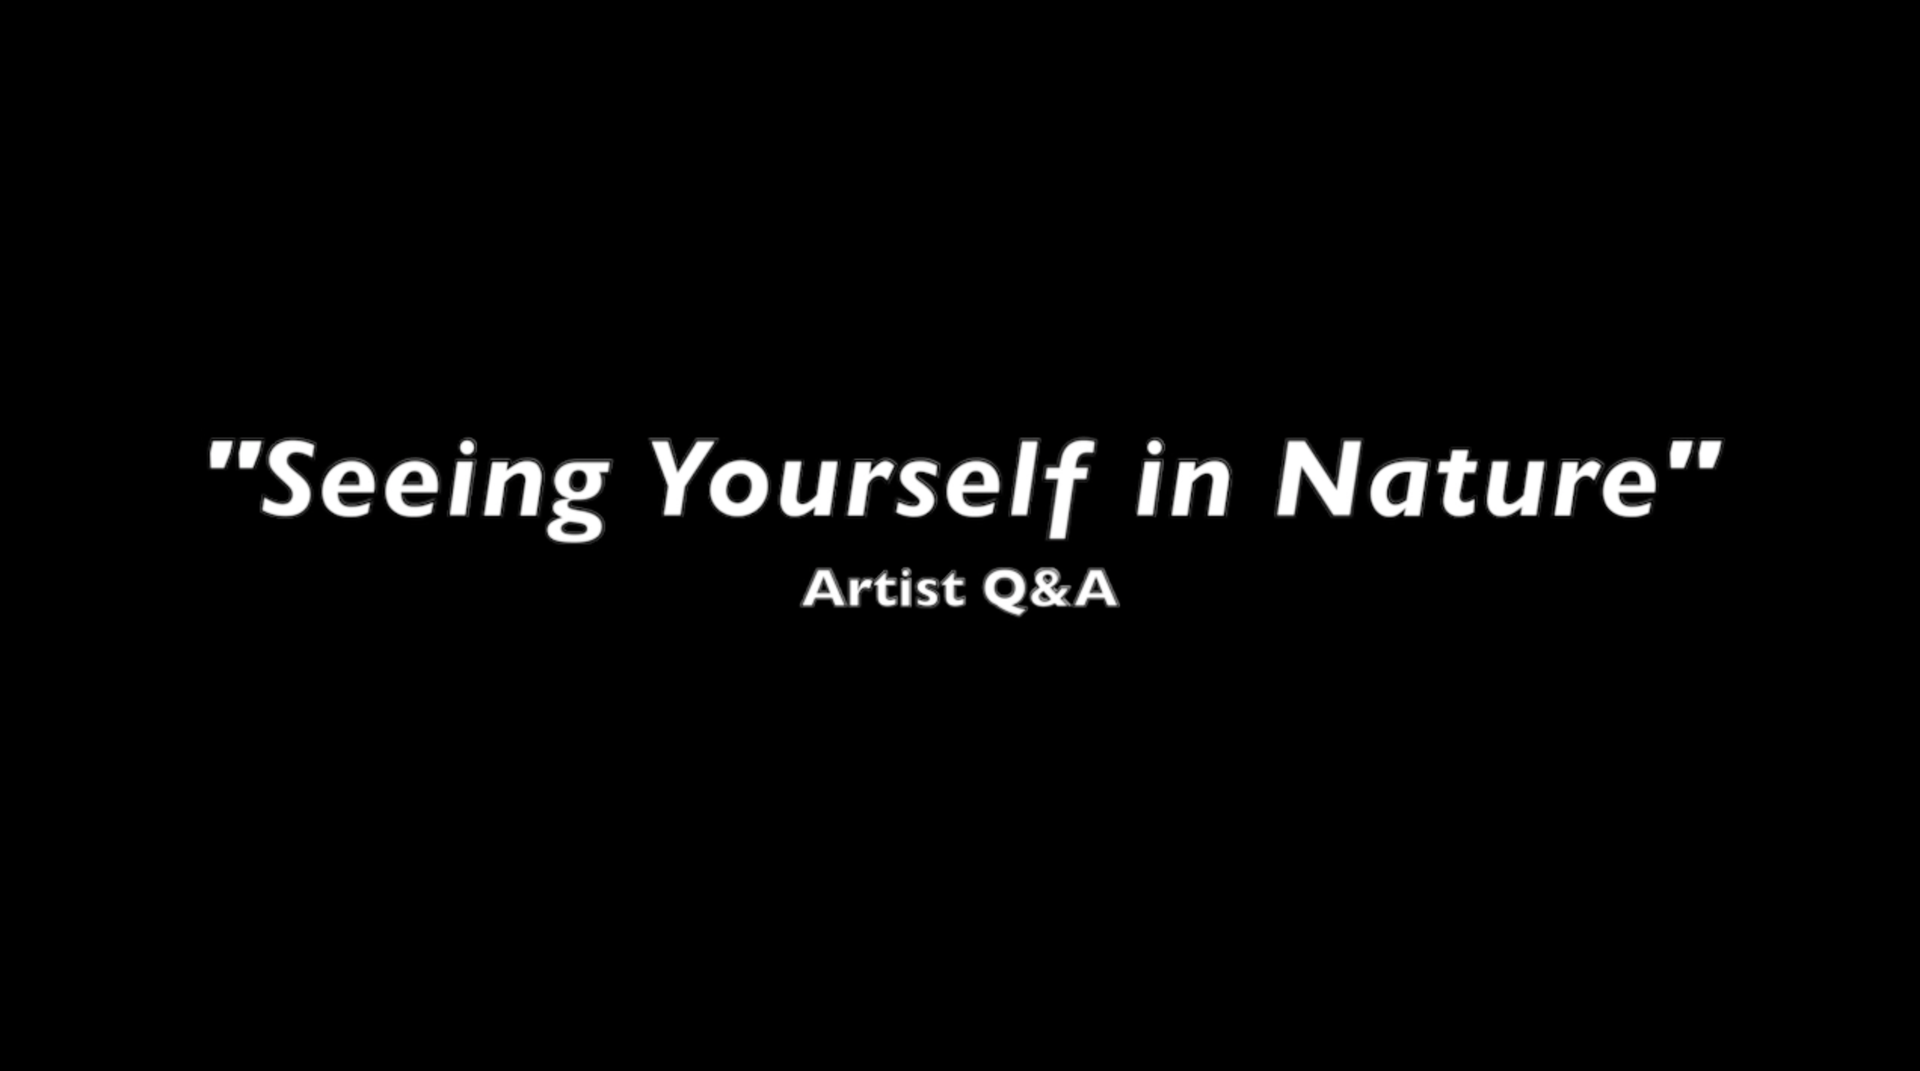 Screen shot of title card with white text "Seeing Yourself in Nature Artist Q&A" over black background